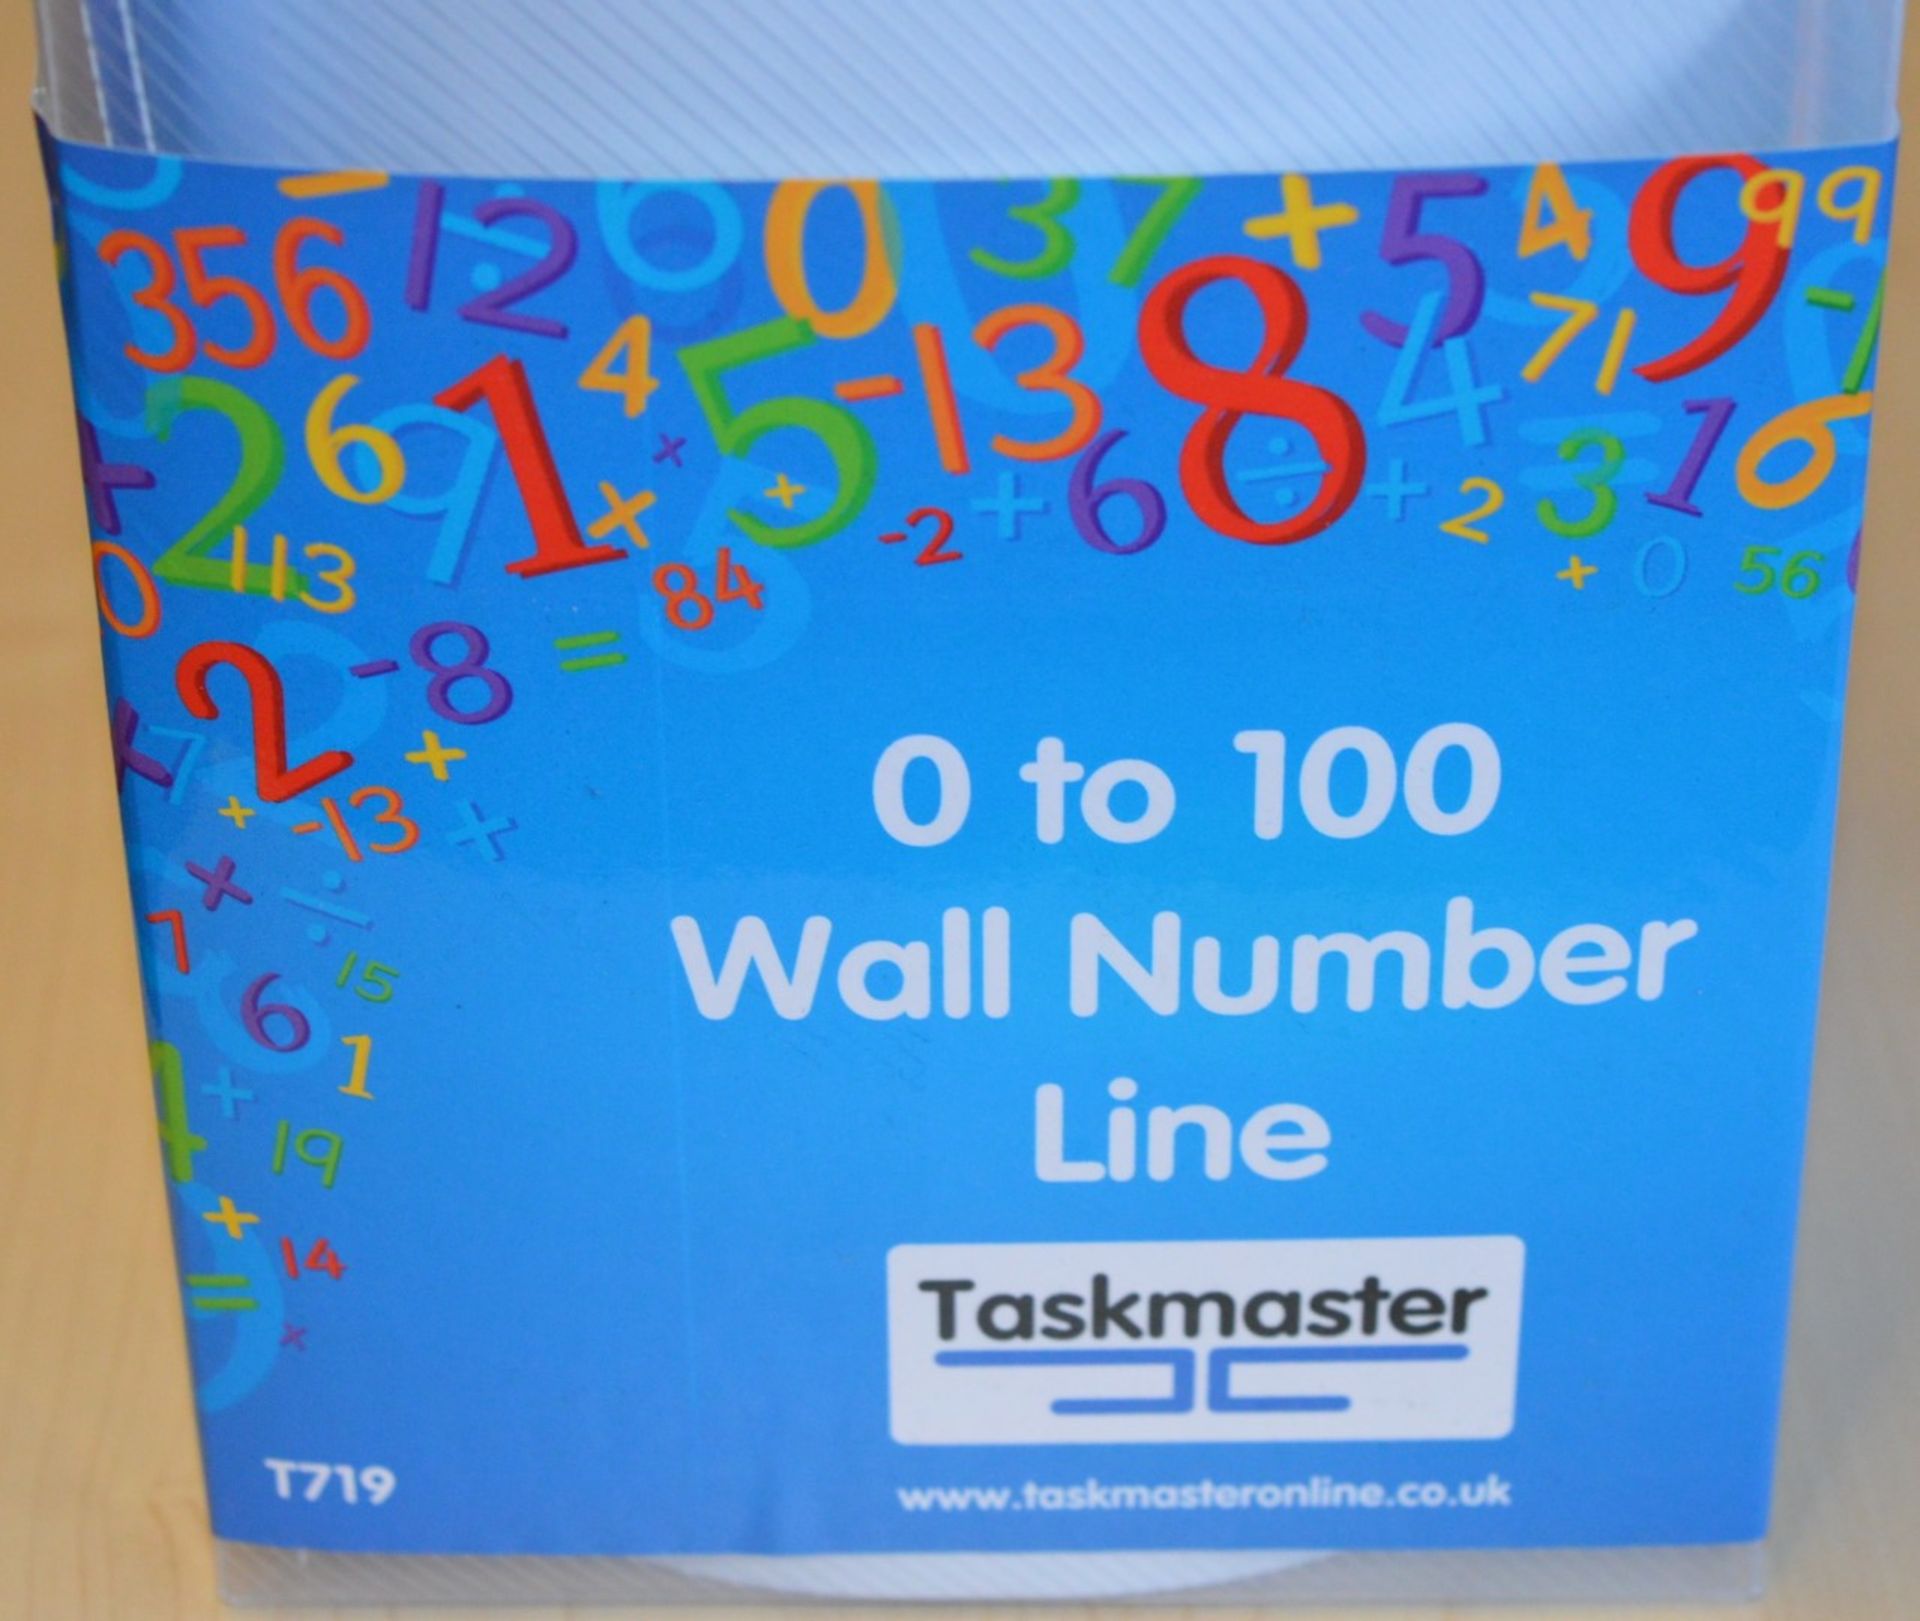 9 x Taskmaster 0 to 100 Wall Number Line Maths Classroom School Education Charts - Brand New Box - Image 4 of 5